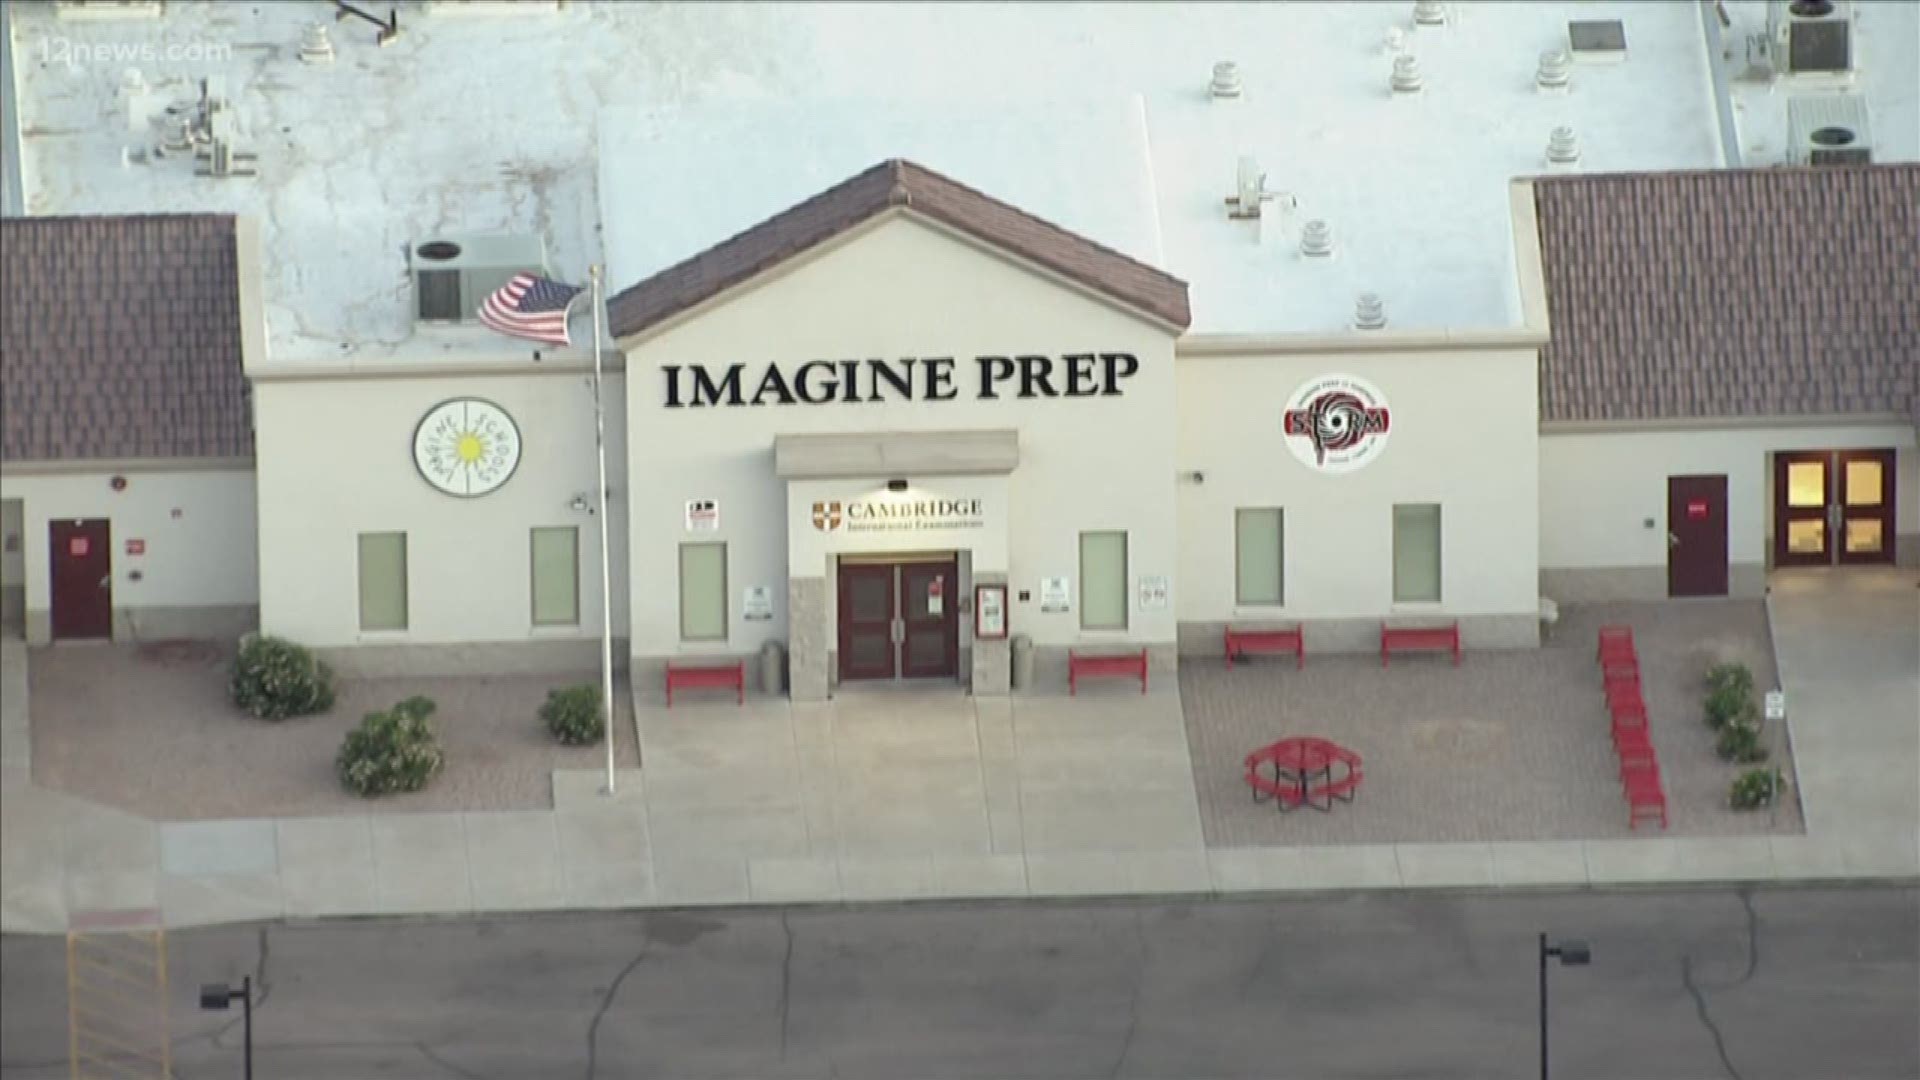 Imagine Prep in Surprise sent out a letter to parents Tuesday, informing them someone at the school has been diagnosed with tuberculosis.